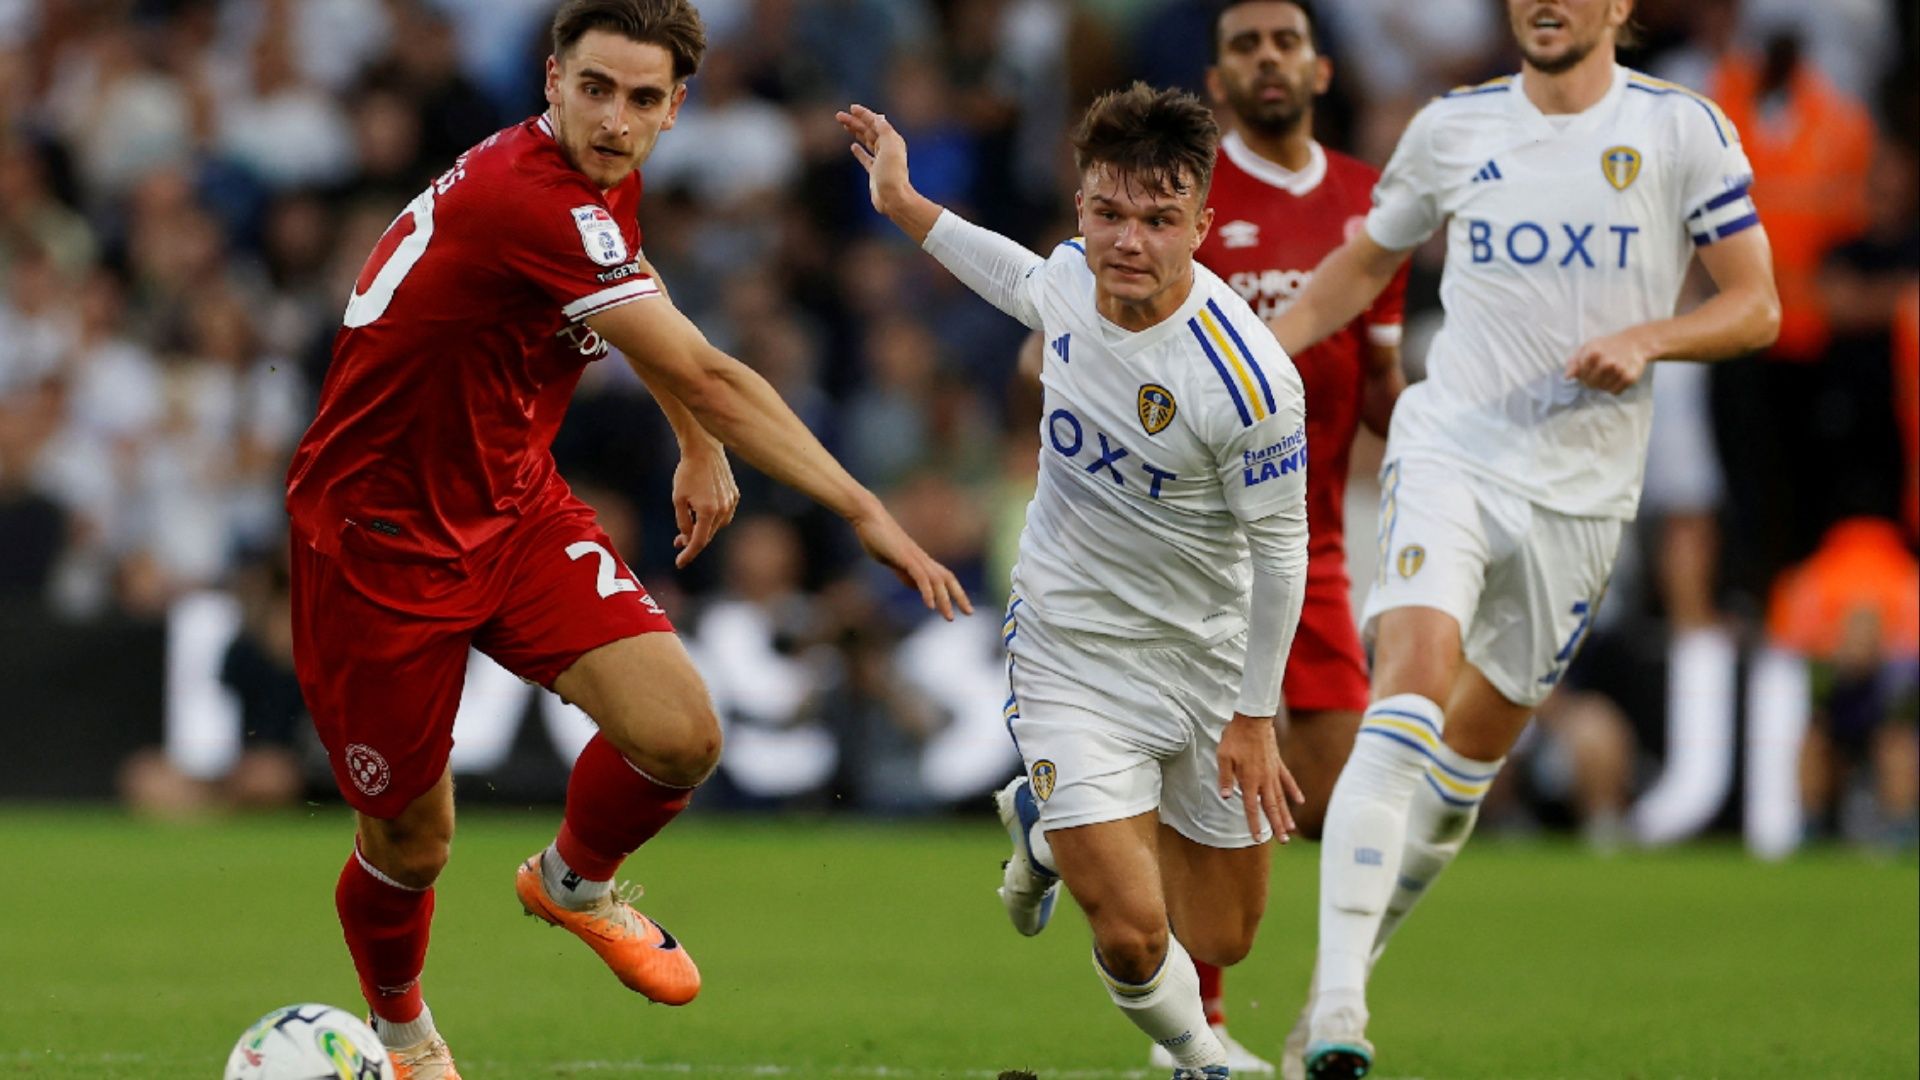 Rangers and QPR transfer interest in Leeds United player revealed